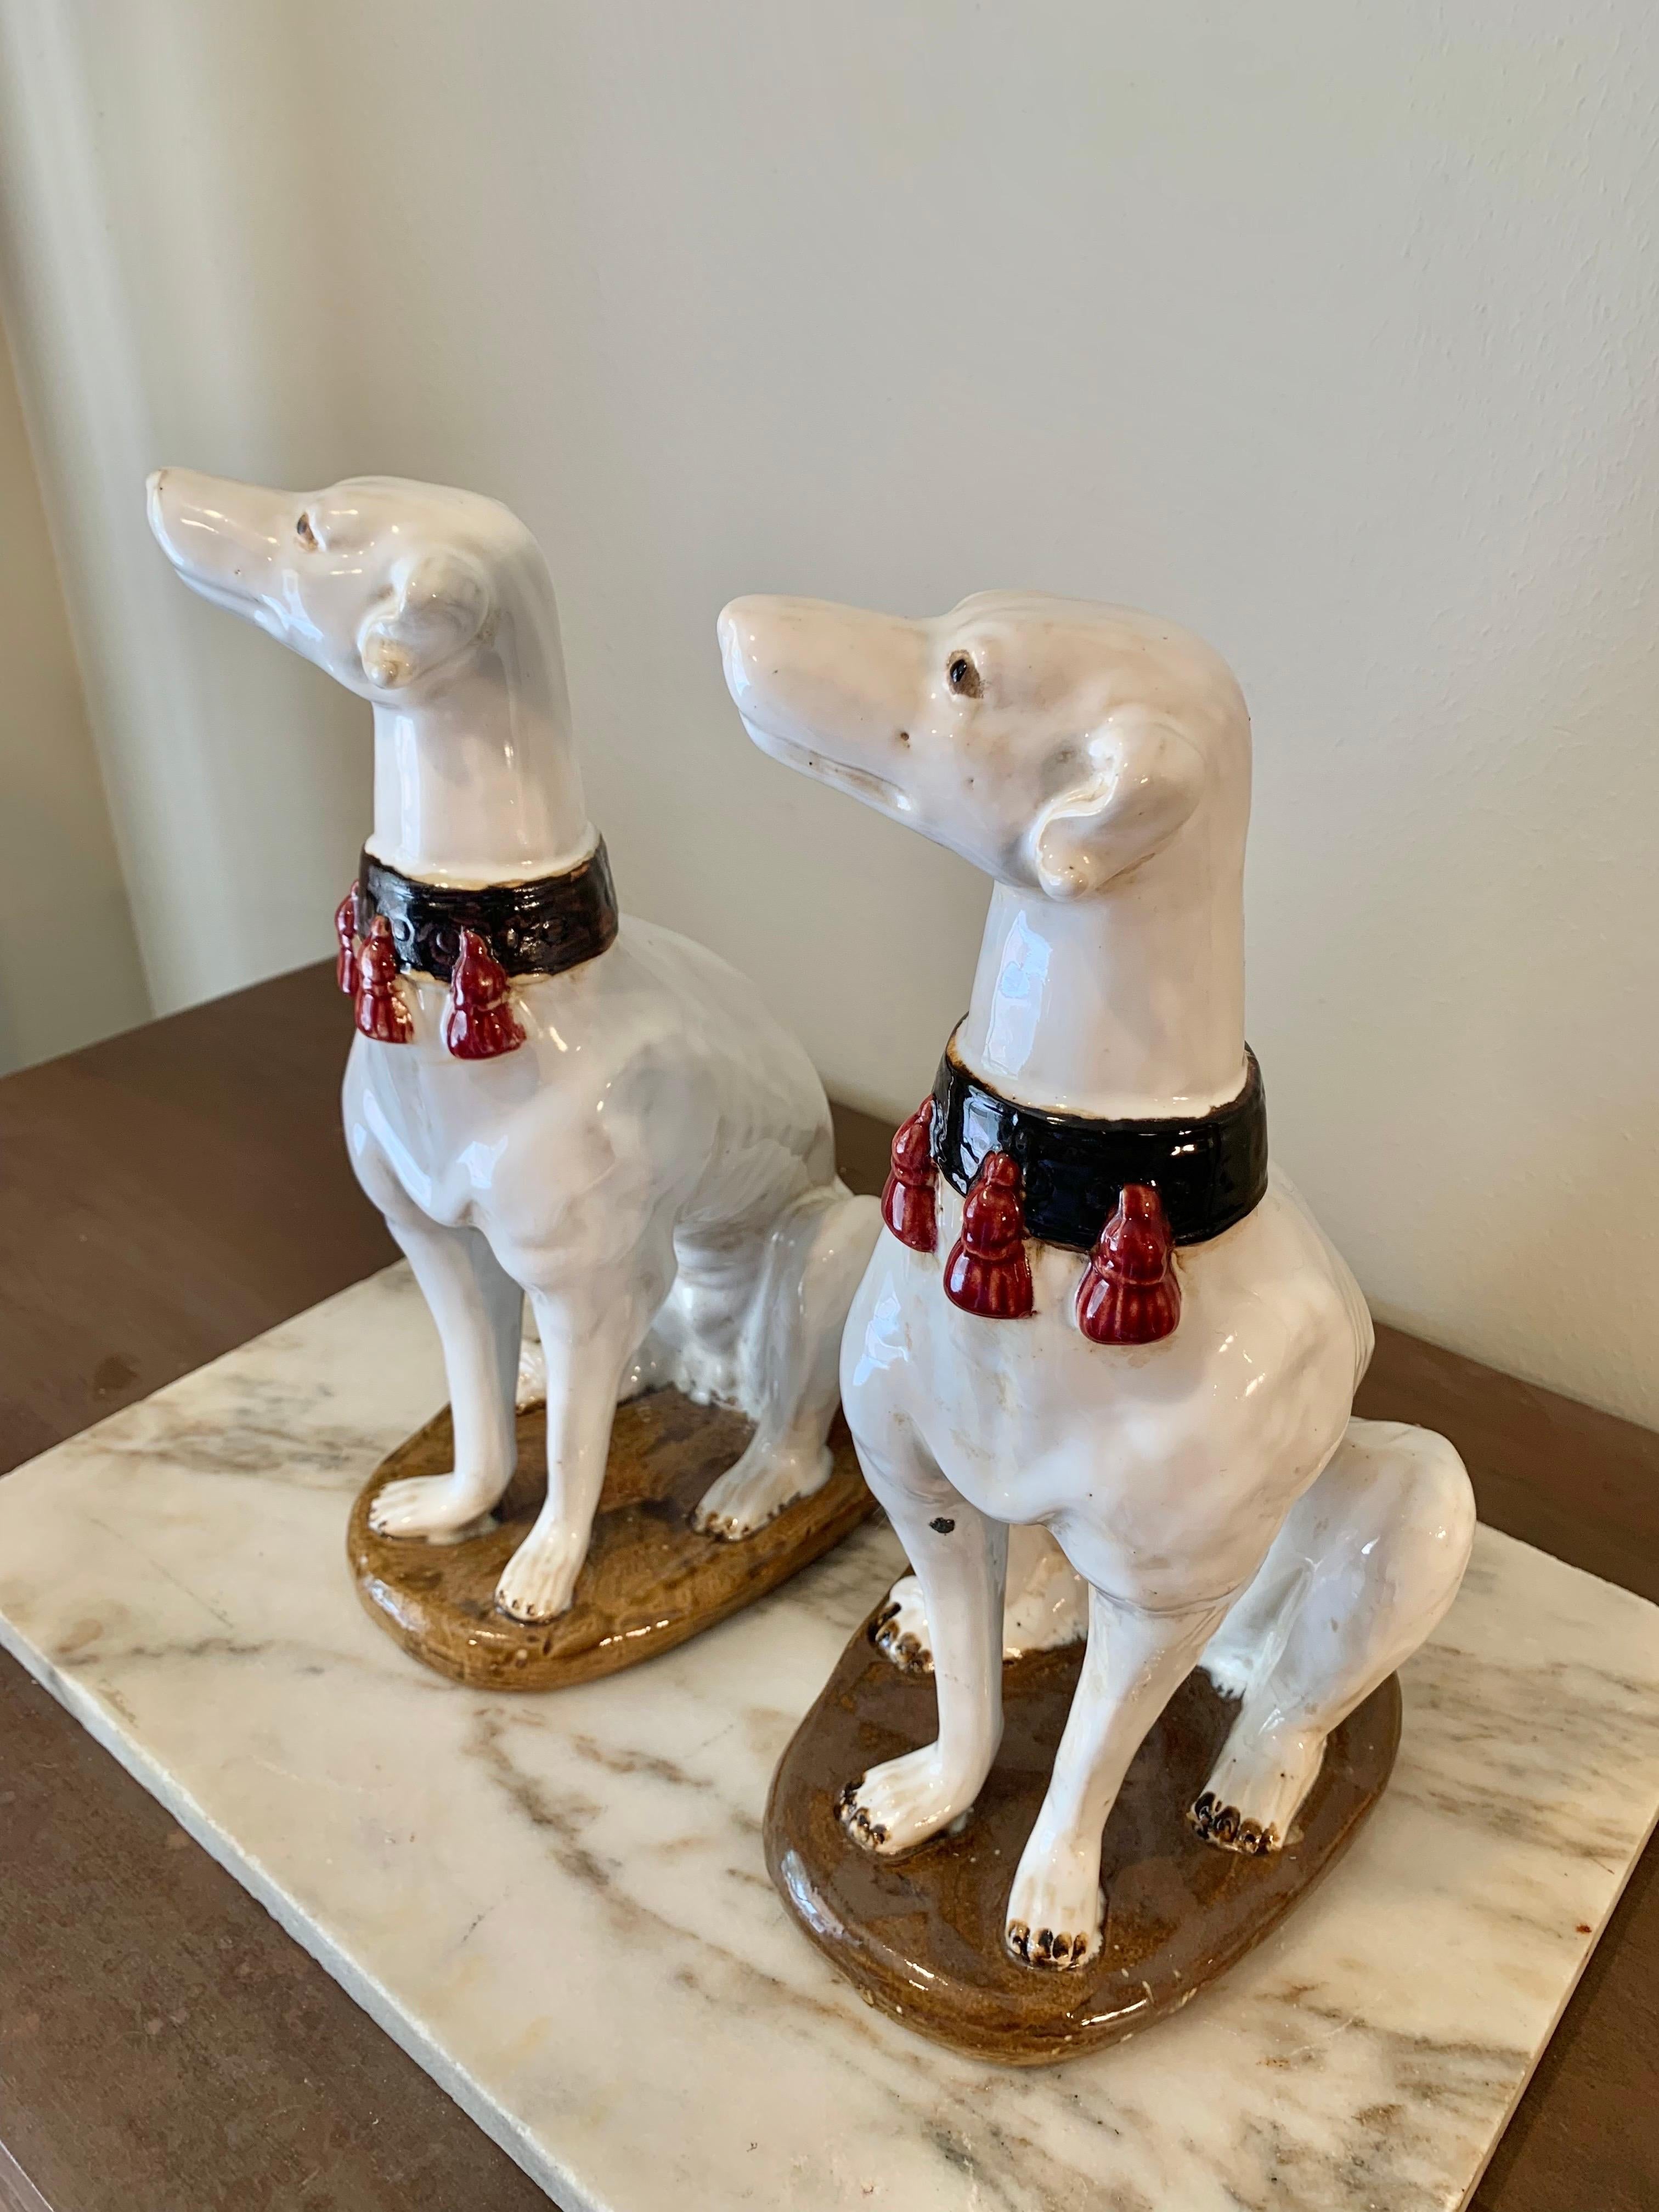 Mid 20th Century Italian Ceramic Whippet Sculptures - a Pair For Sale 5